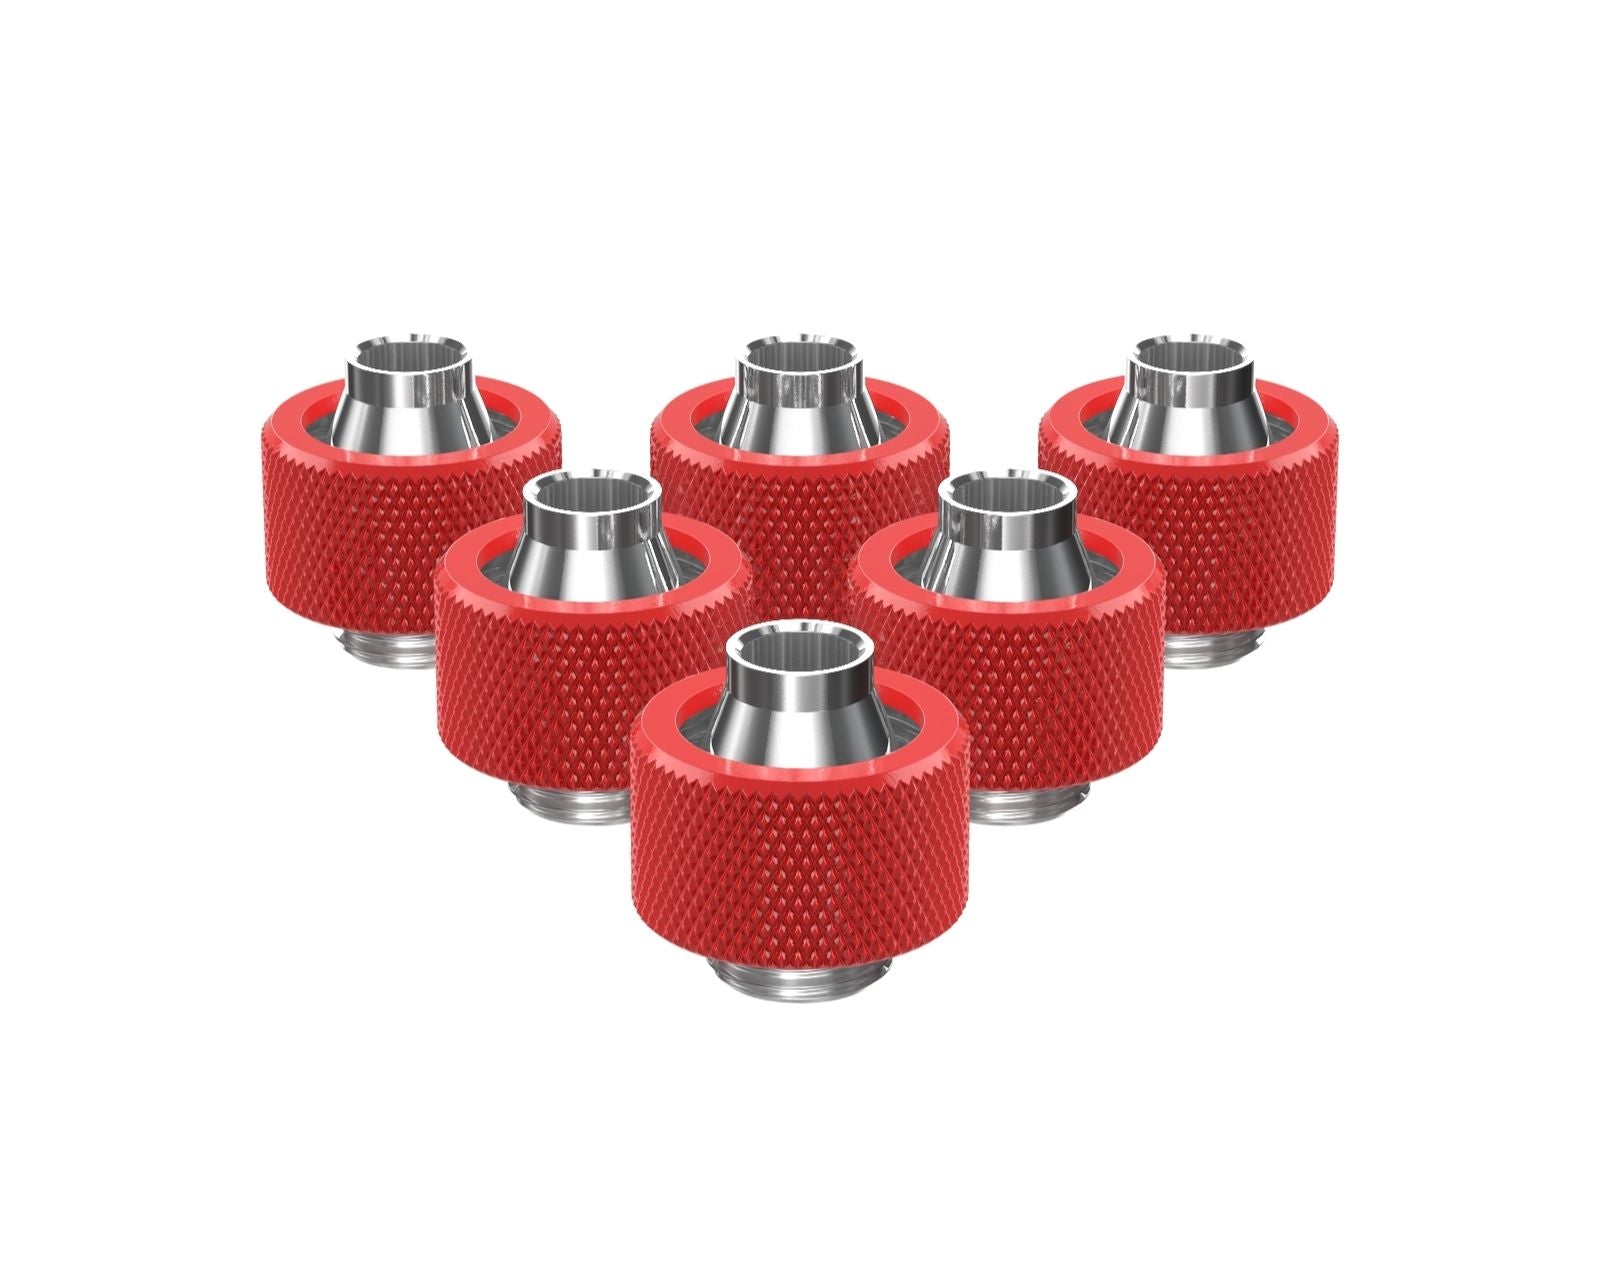 PrimoChill SecureFit SX - Premium Compression Fitting For 7/16in ID x 5/8in OD Flexible Tubing 6 Pack (F-SFSX758-6) - Available in 20+ Colors, Custom Watercooling Loop Ready - Razor Red